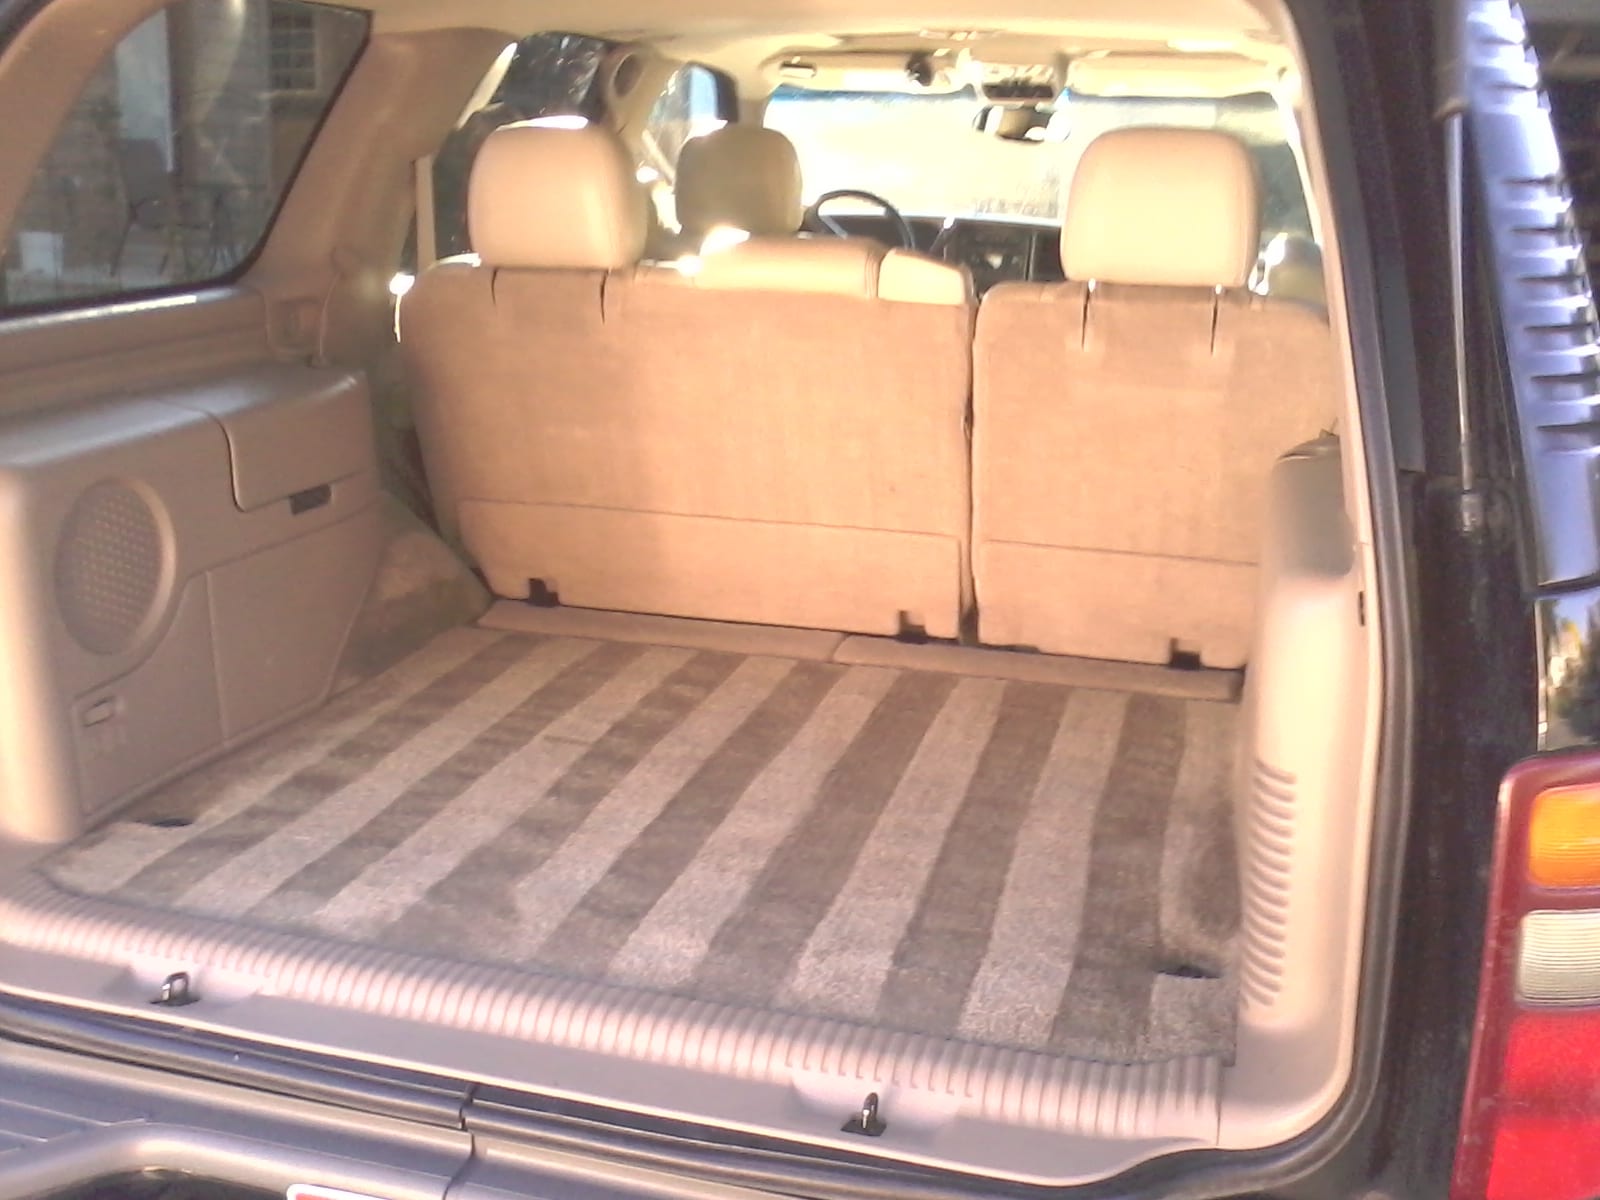 How To Clean Vehicle Carpet